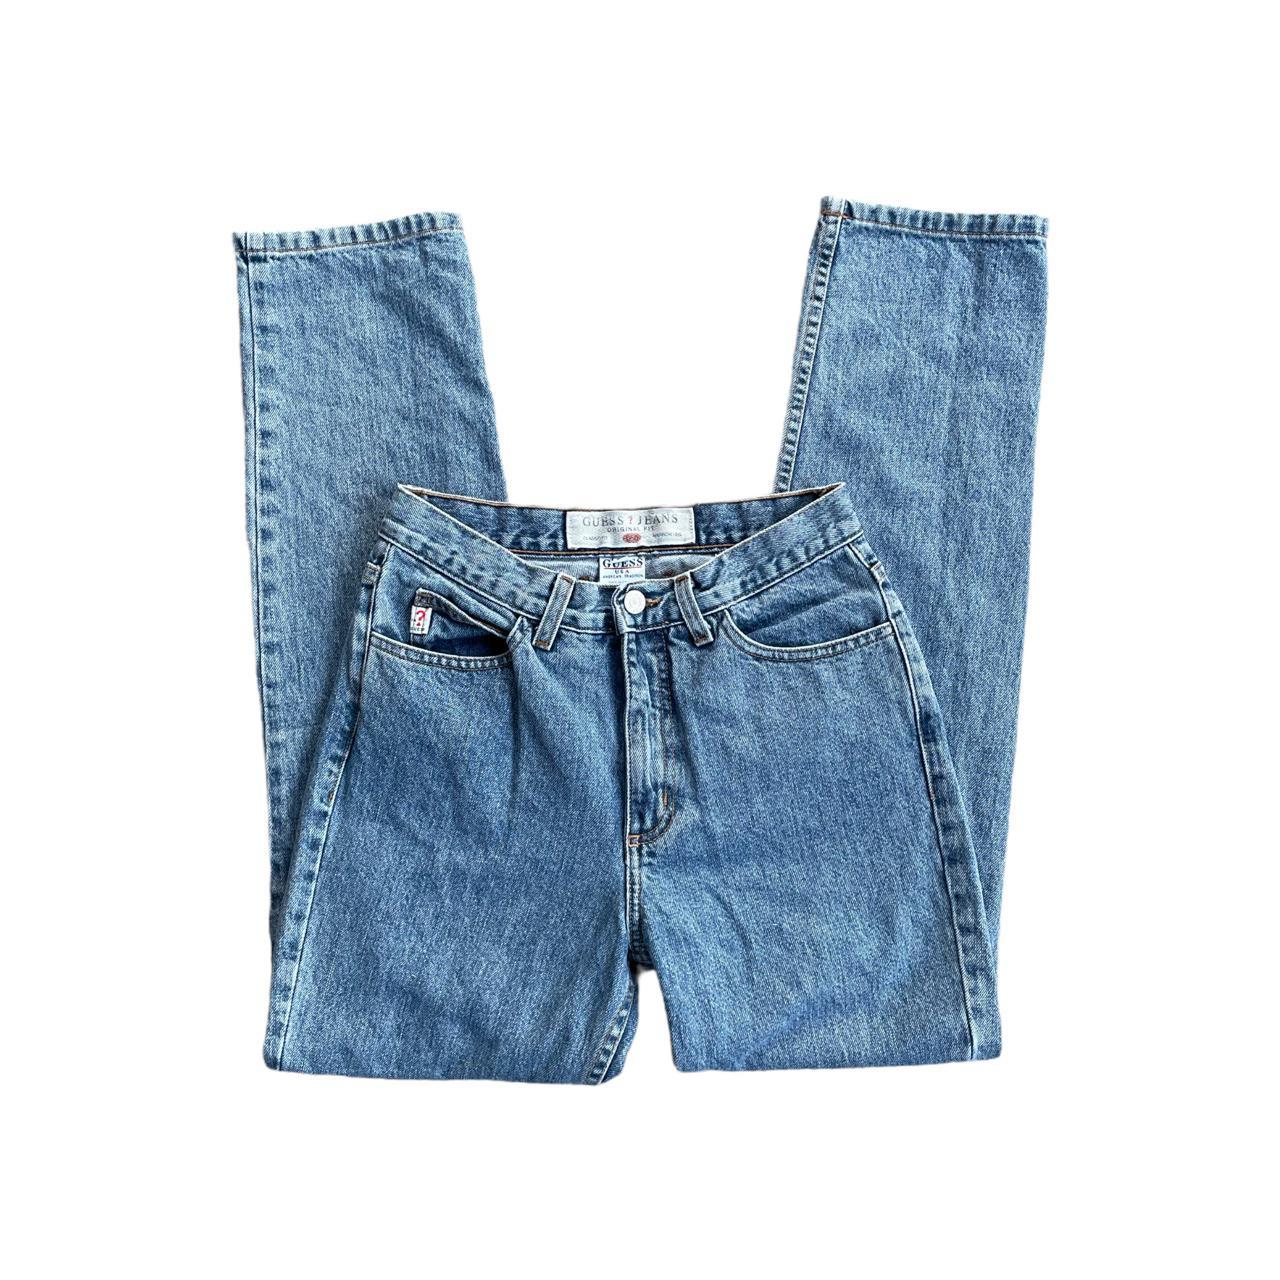 Product Image 2 - Vintage Guess Classic Fit Jeans